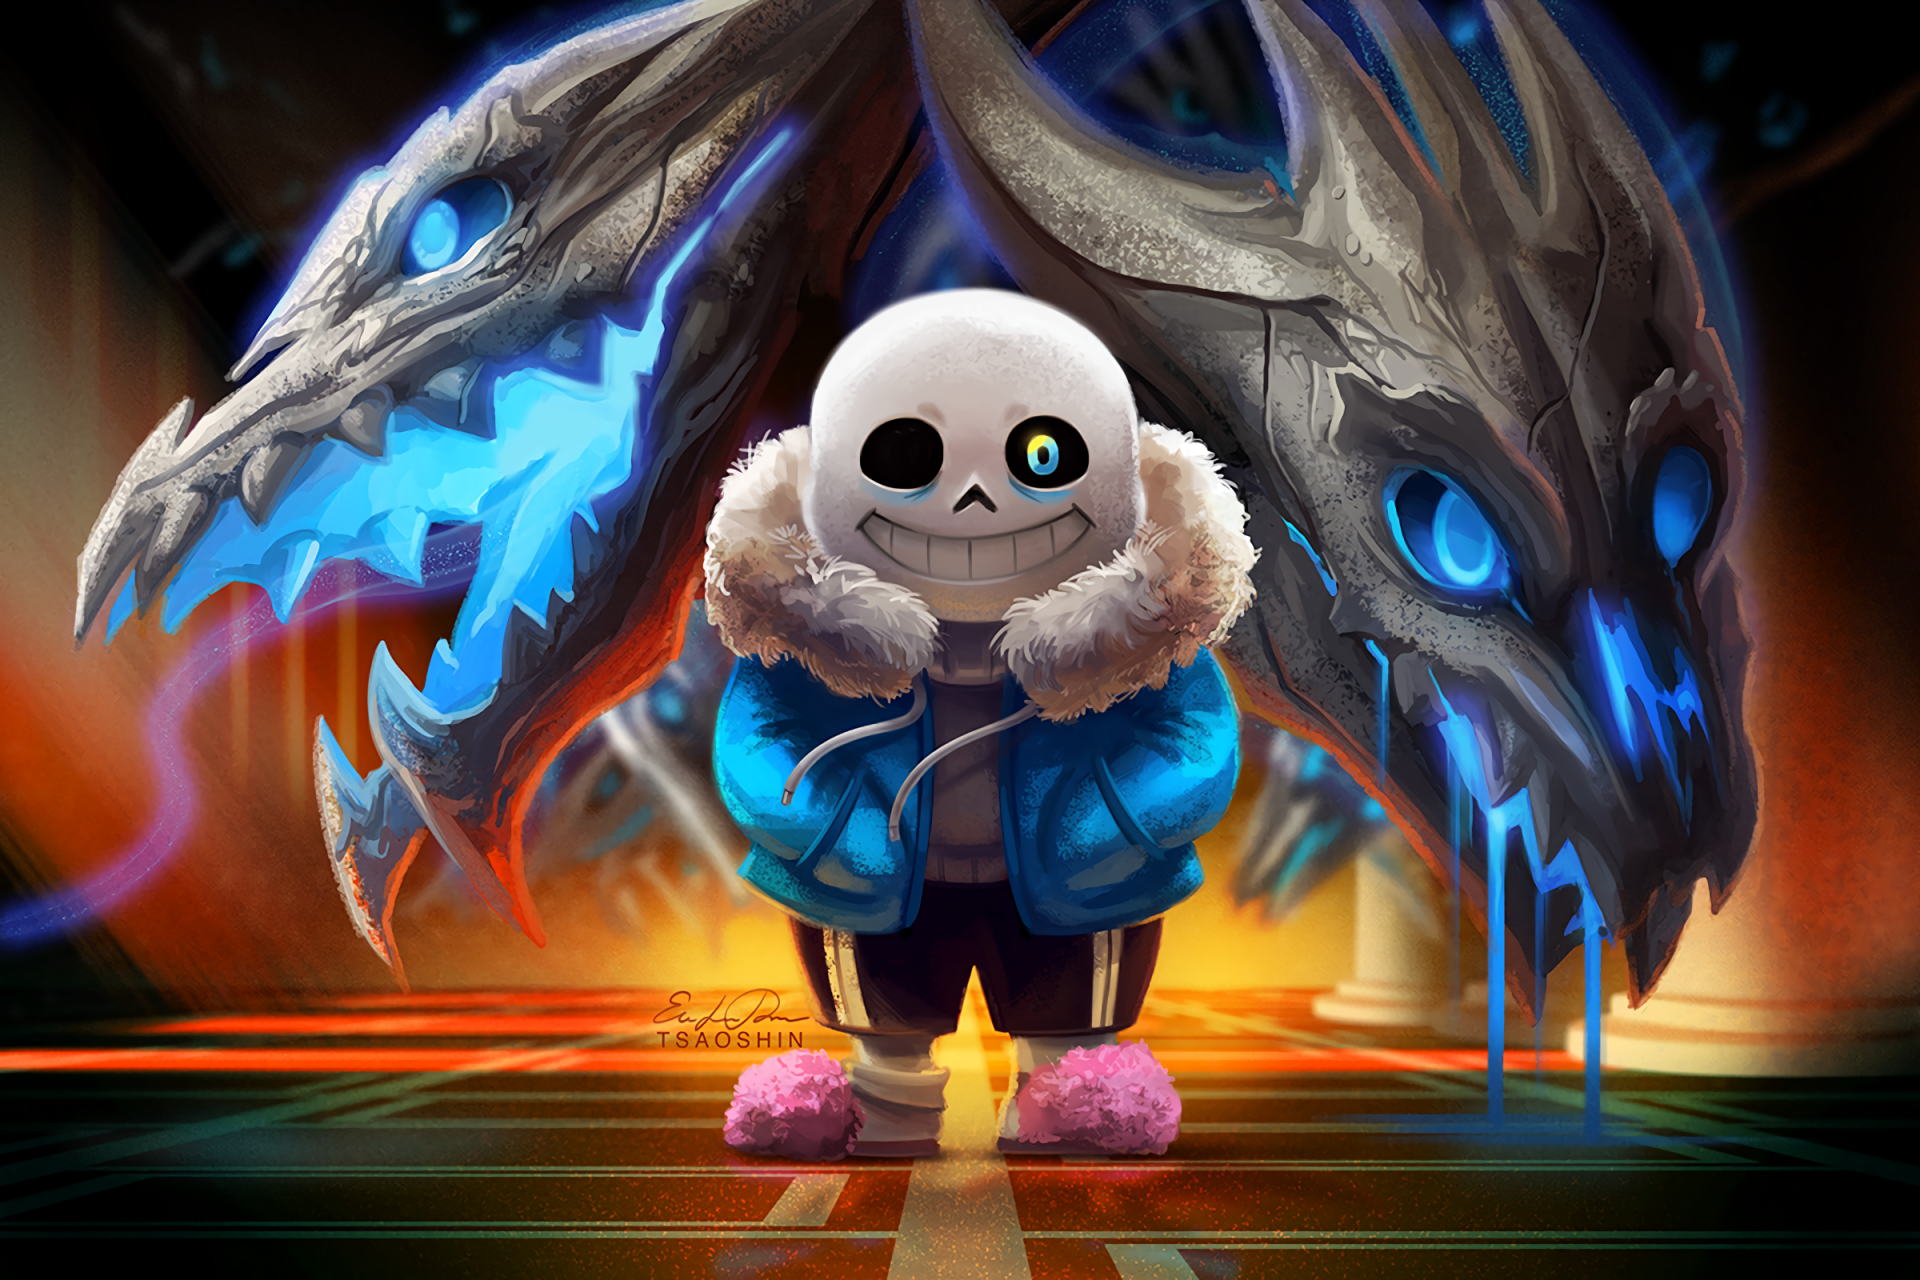 HD wallpaper featuring Sans from Undertale, a popular video game character, standing confidently with a menacing, dual-headed dragon-like creature behind him.